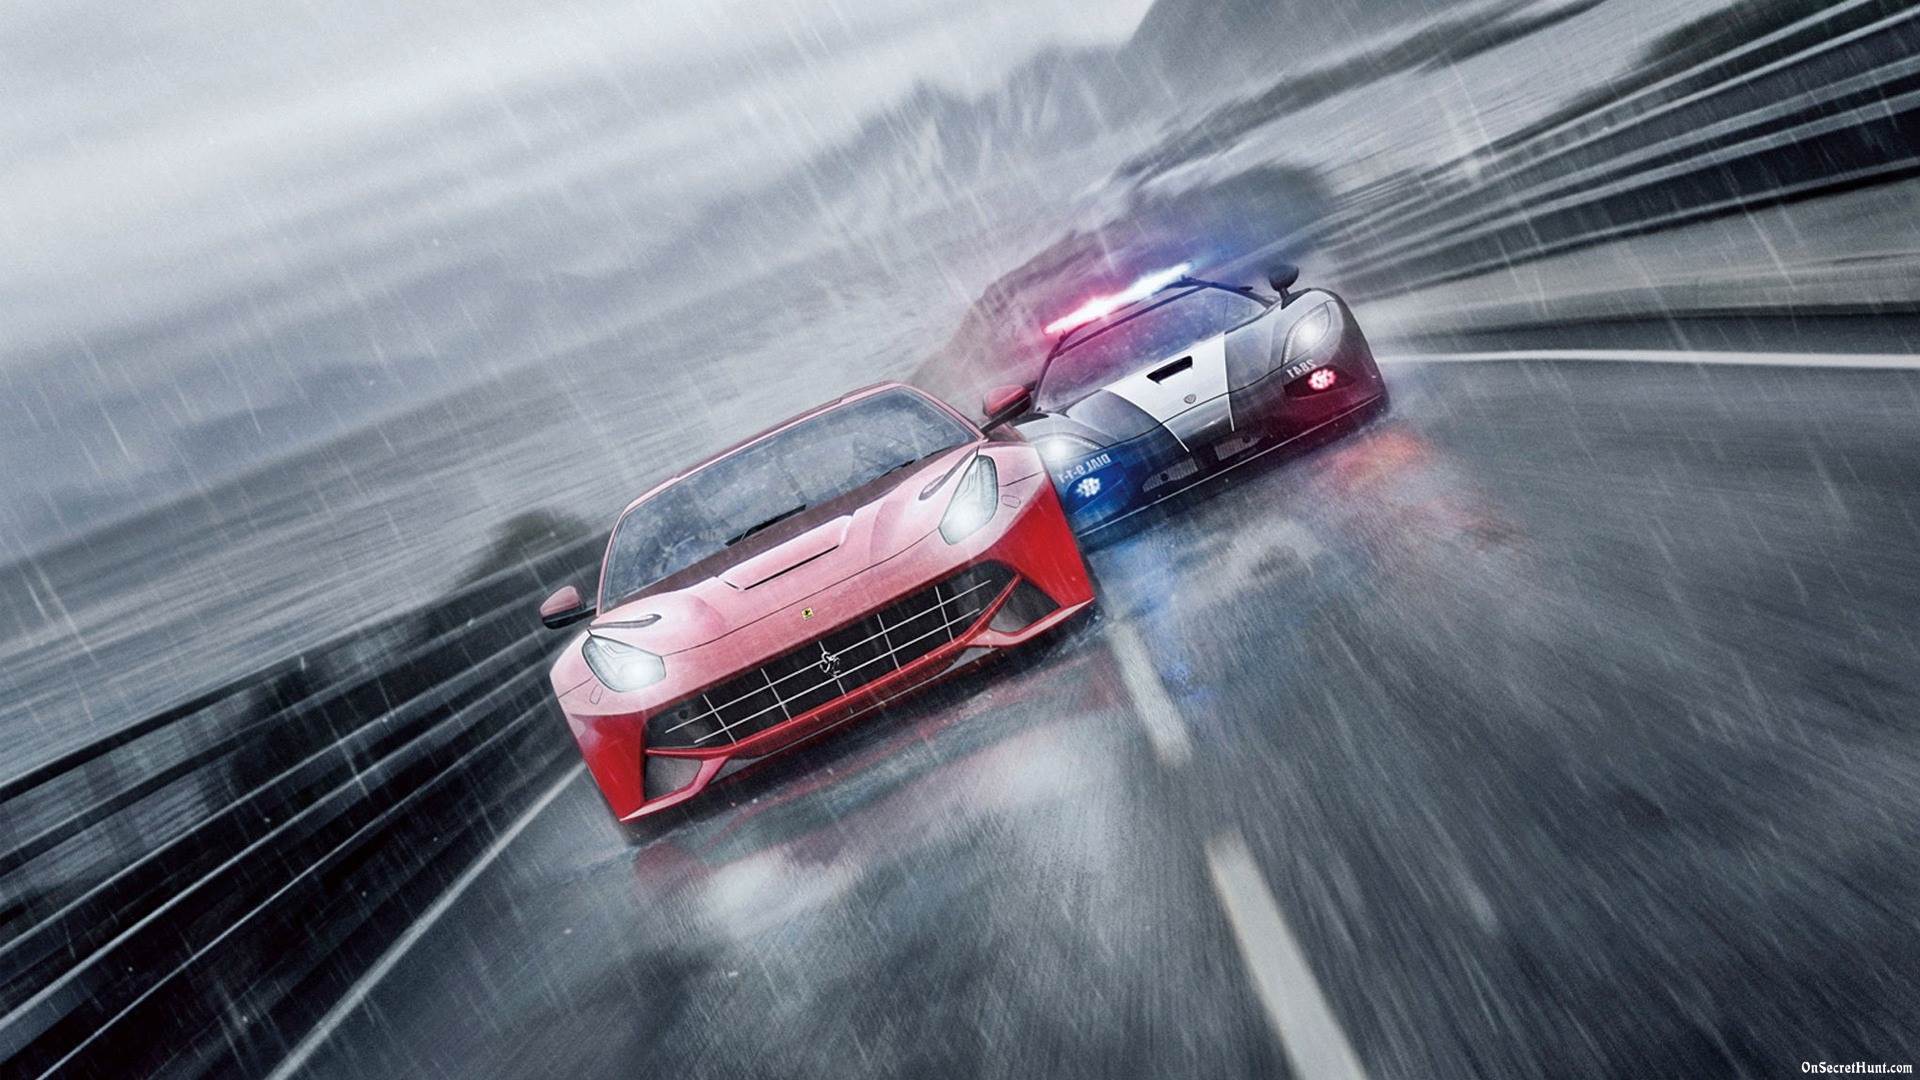 Need for Speed Rivals Wallpaper in 1080P HD « GamingBolt.com